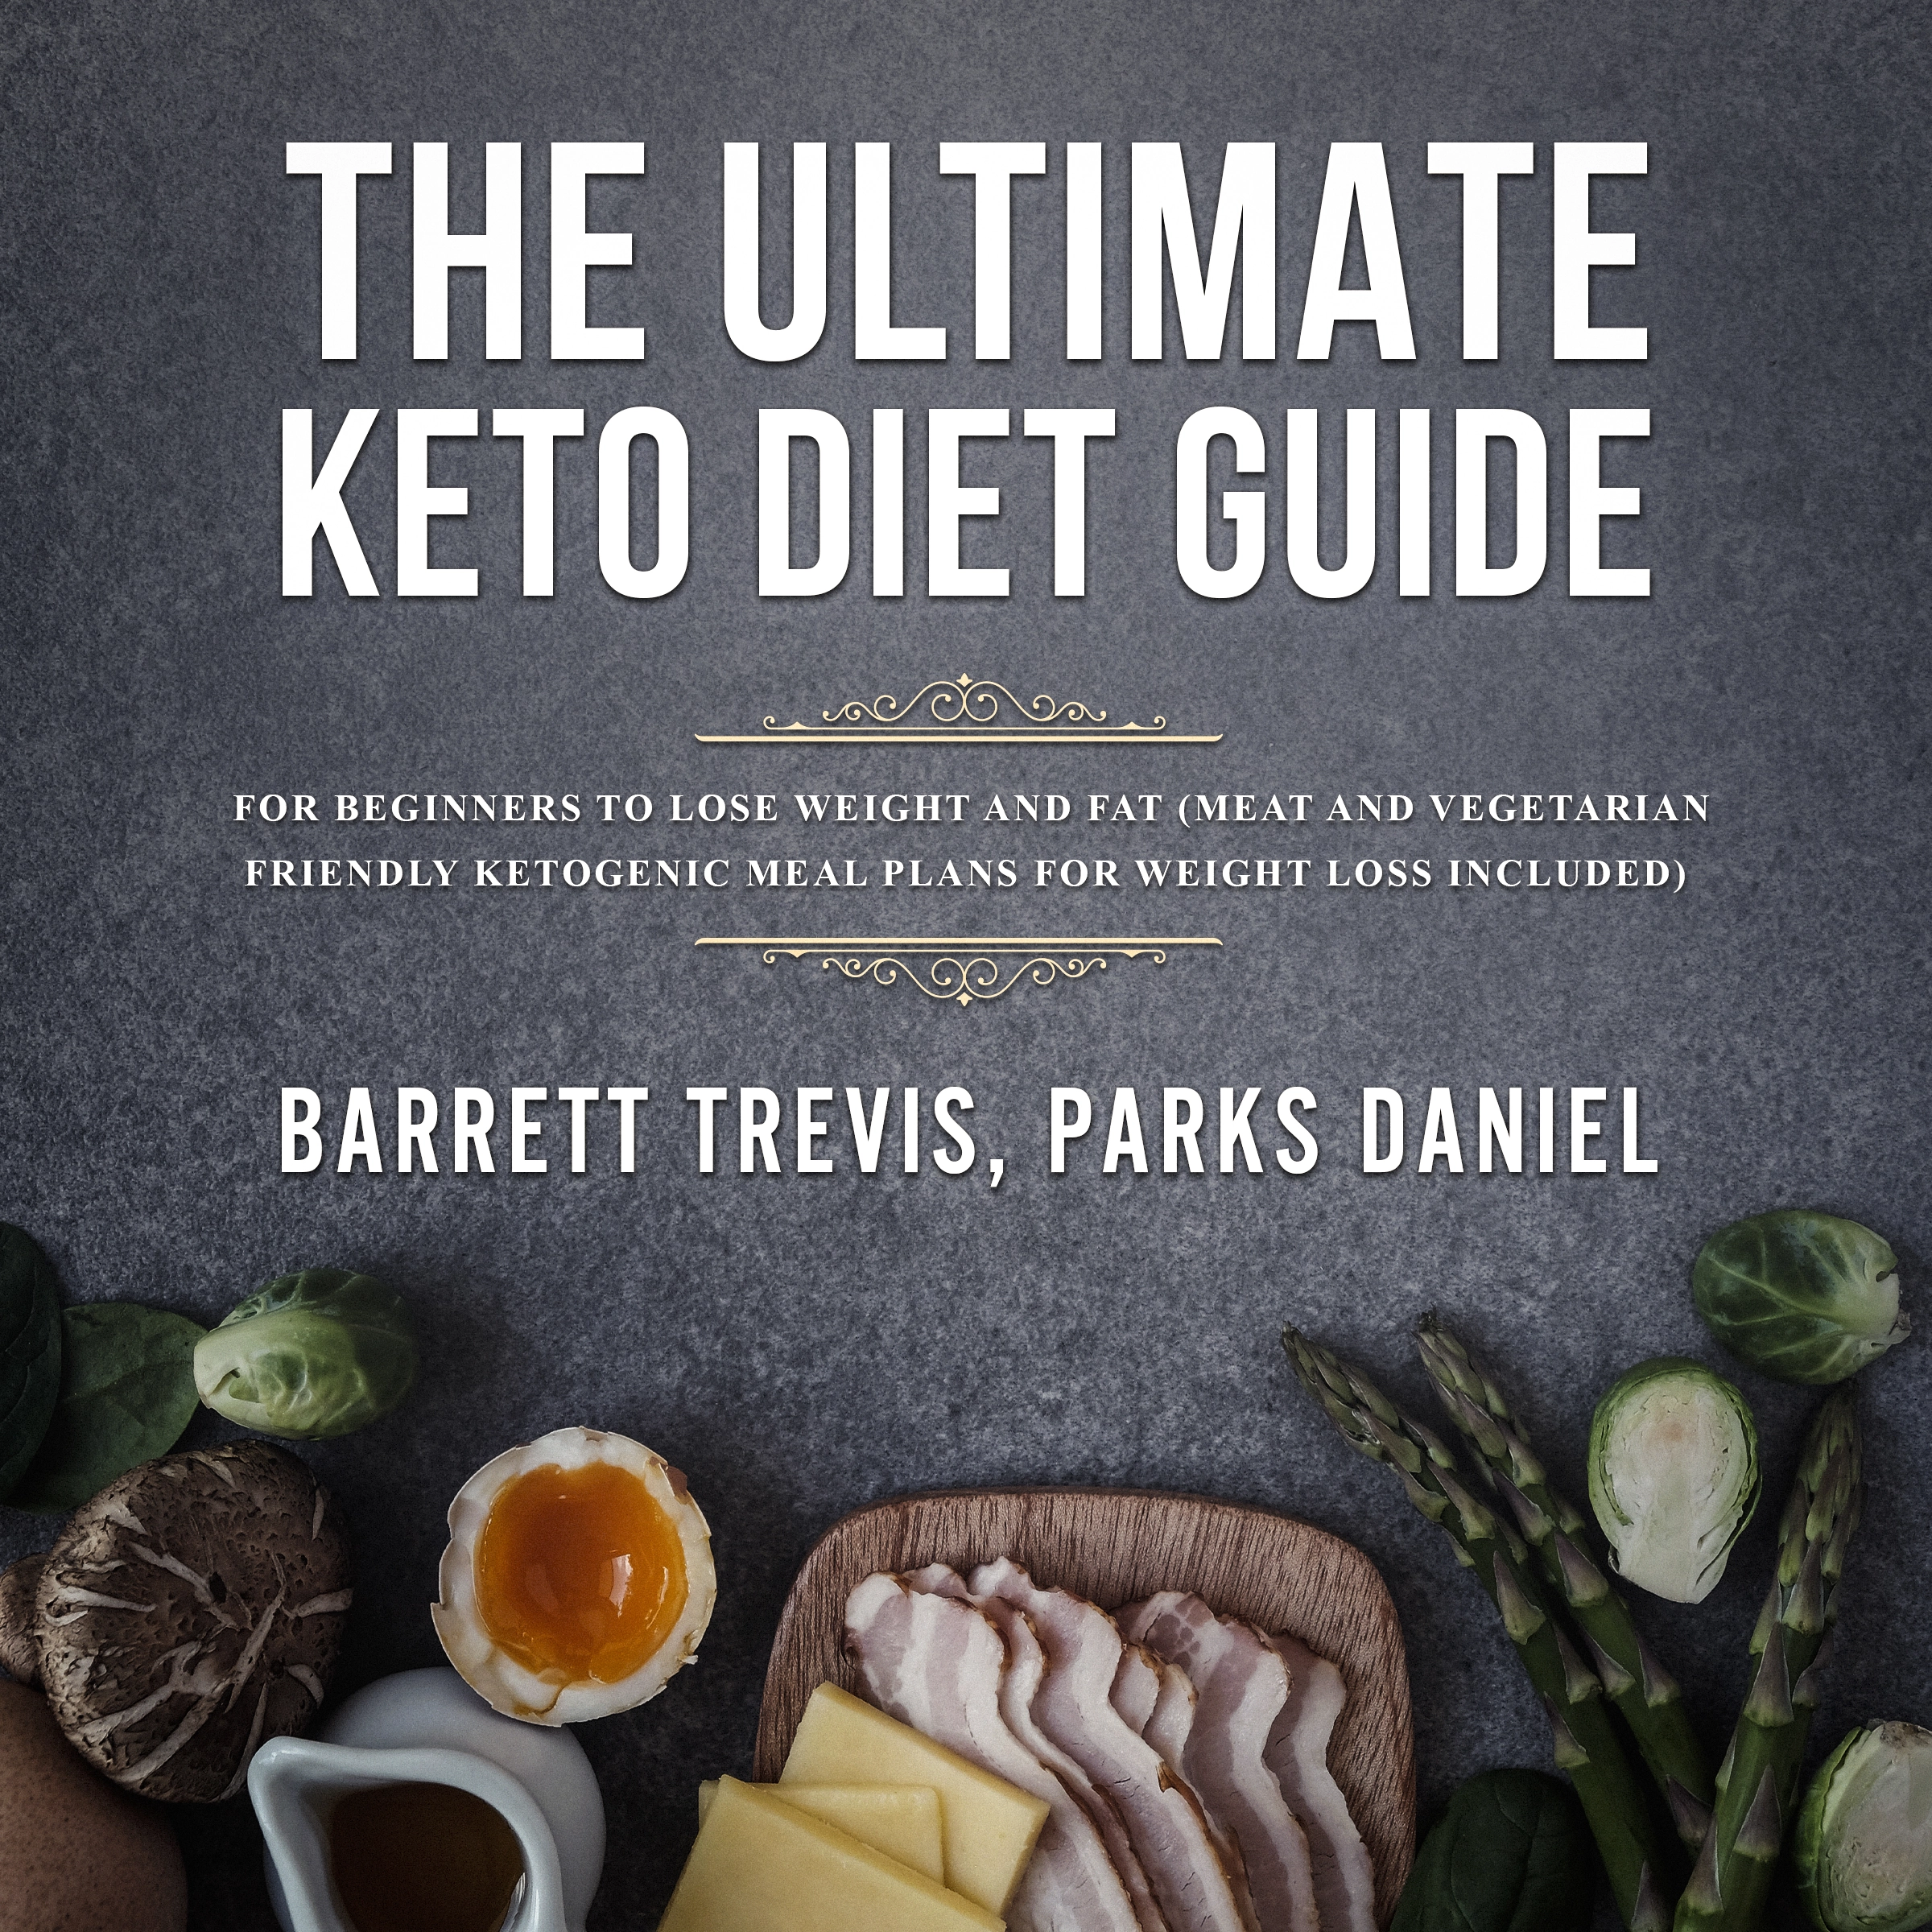 The Ultimate Keto Diet Guide for Beginners to lose Weight and Fat (Meat and Vegetarian Friendly Ketogenic Meal Plans for Weight Loss included) Audiobook by Parks Daniel